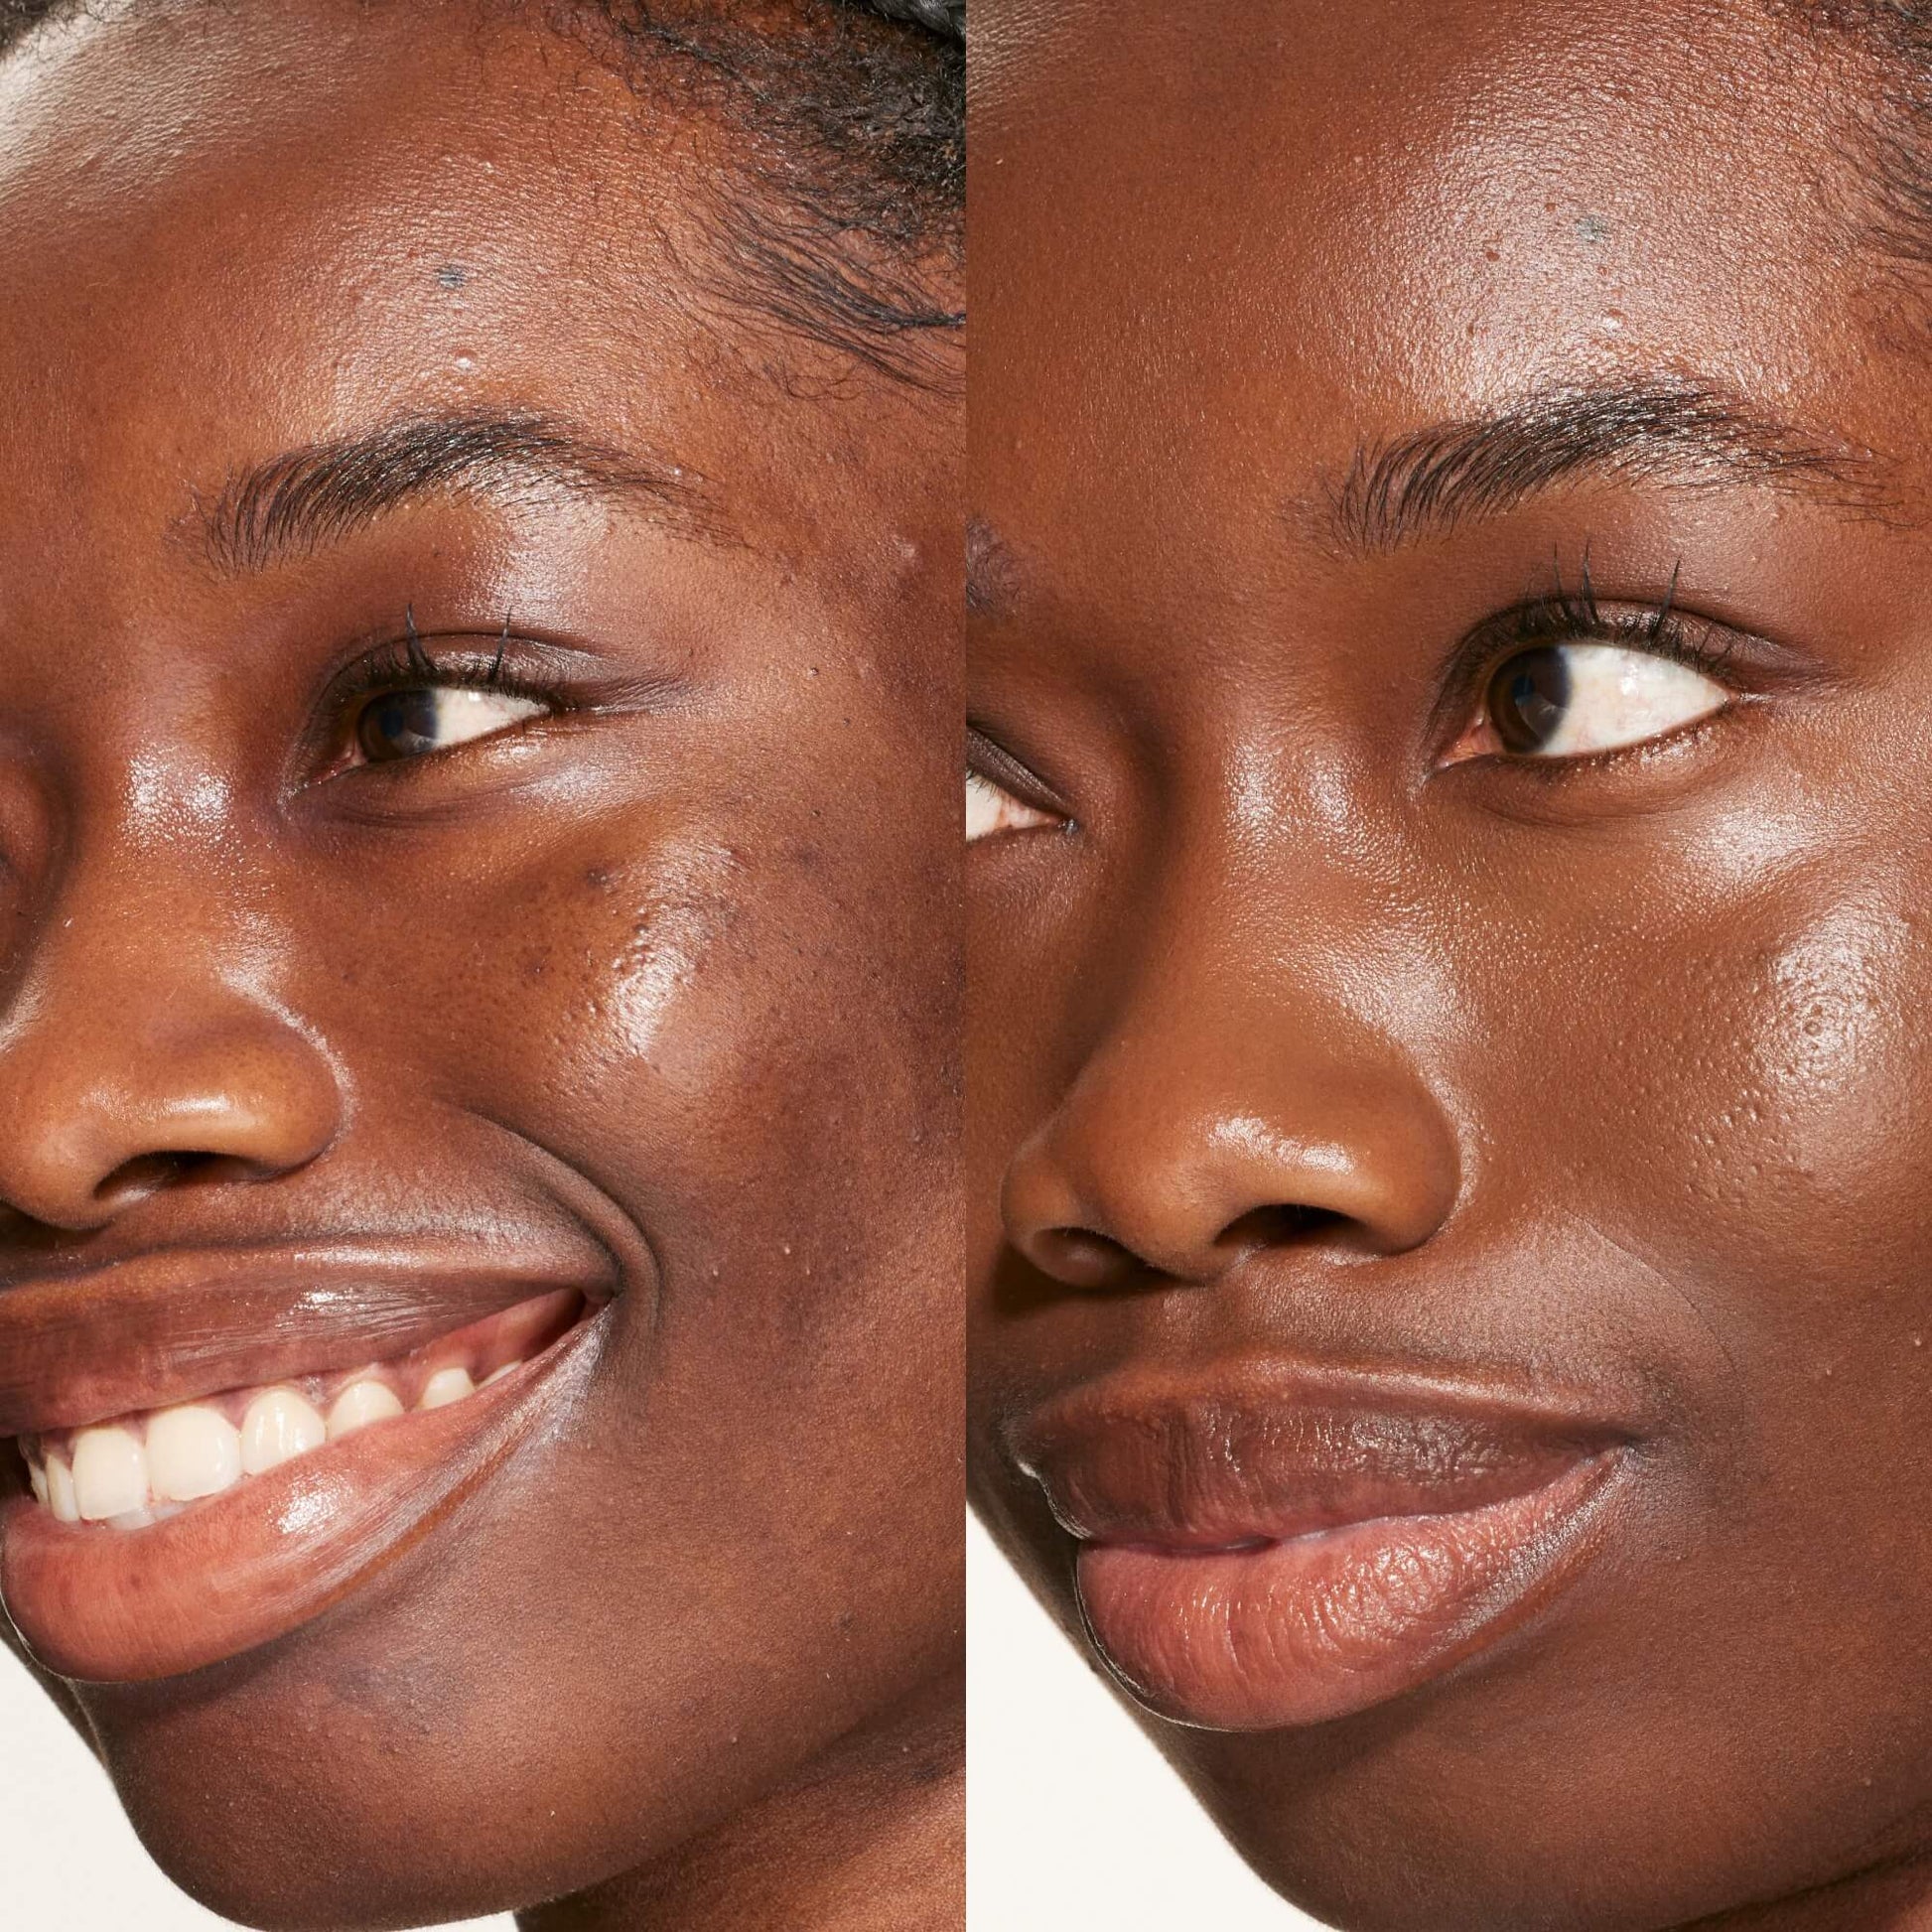 A person's face before and after using Tower 28 Beauty's Swipe Serum Concealer in shade 20.0 WLA to cover up dark circles, blemishes, and discoloration